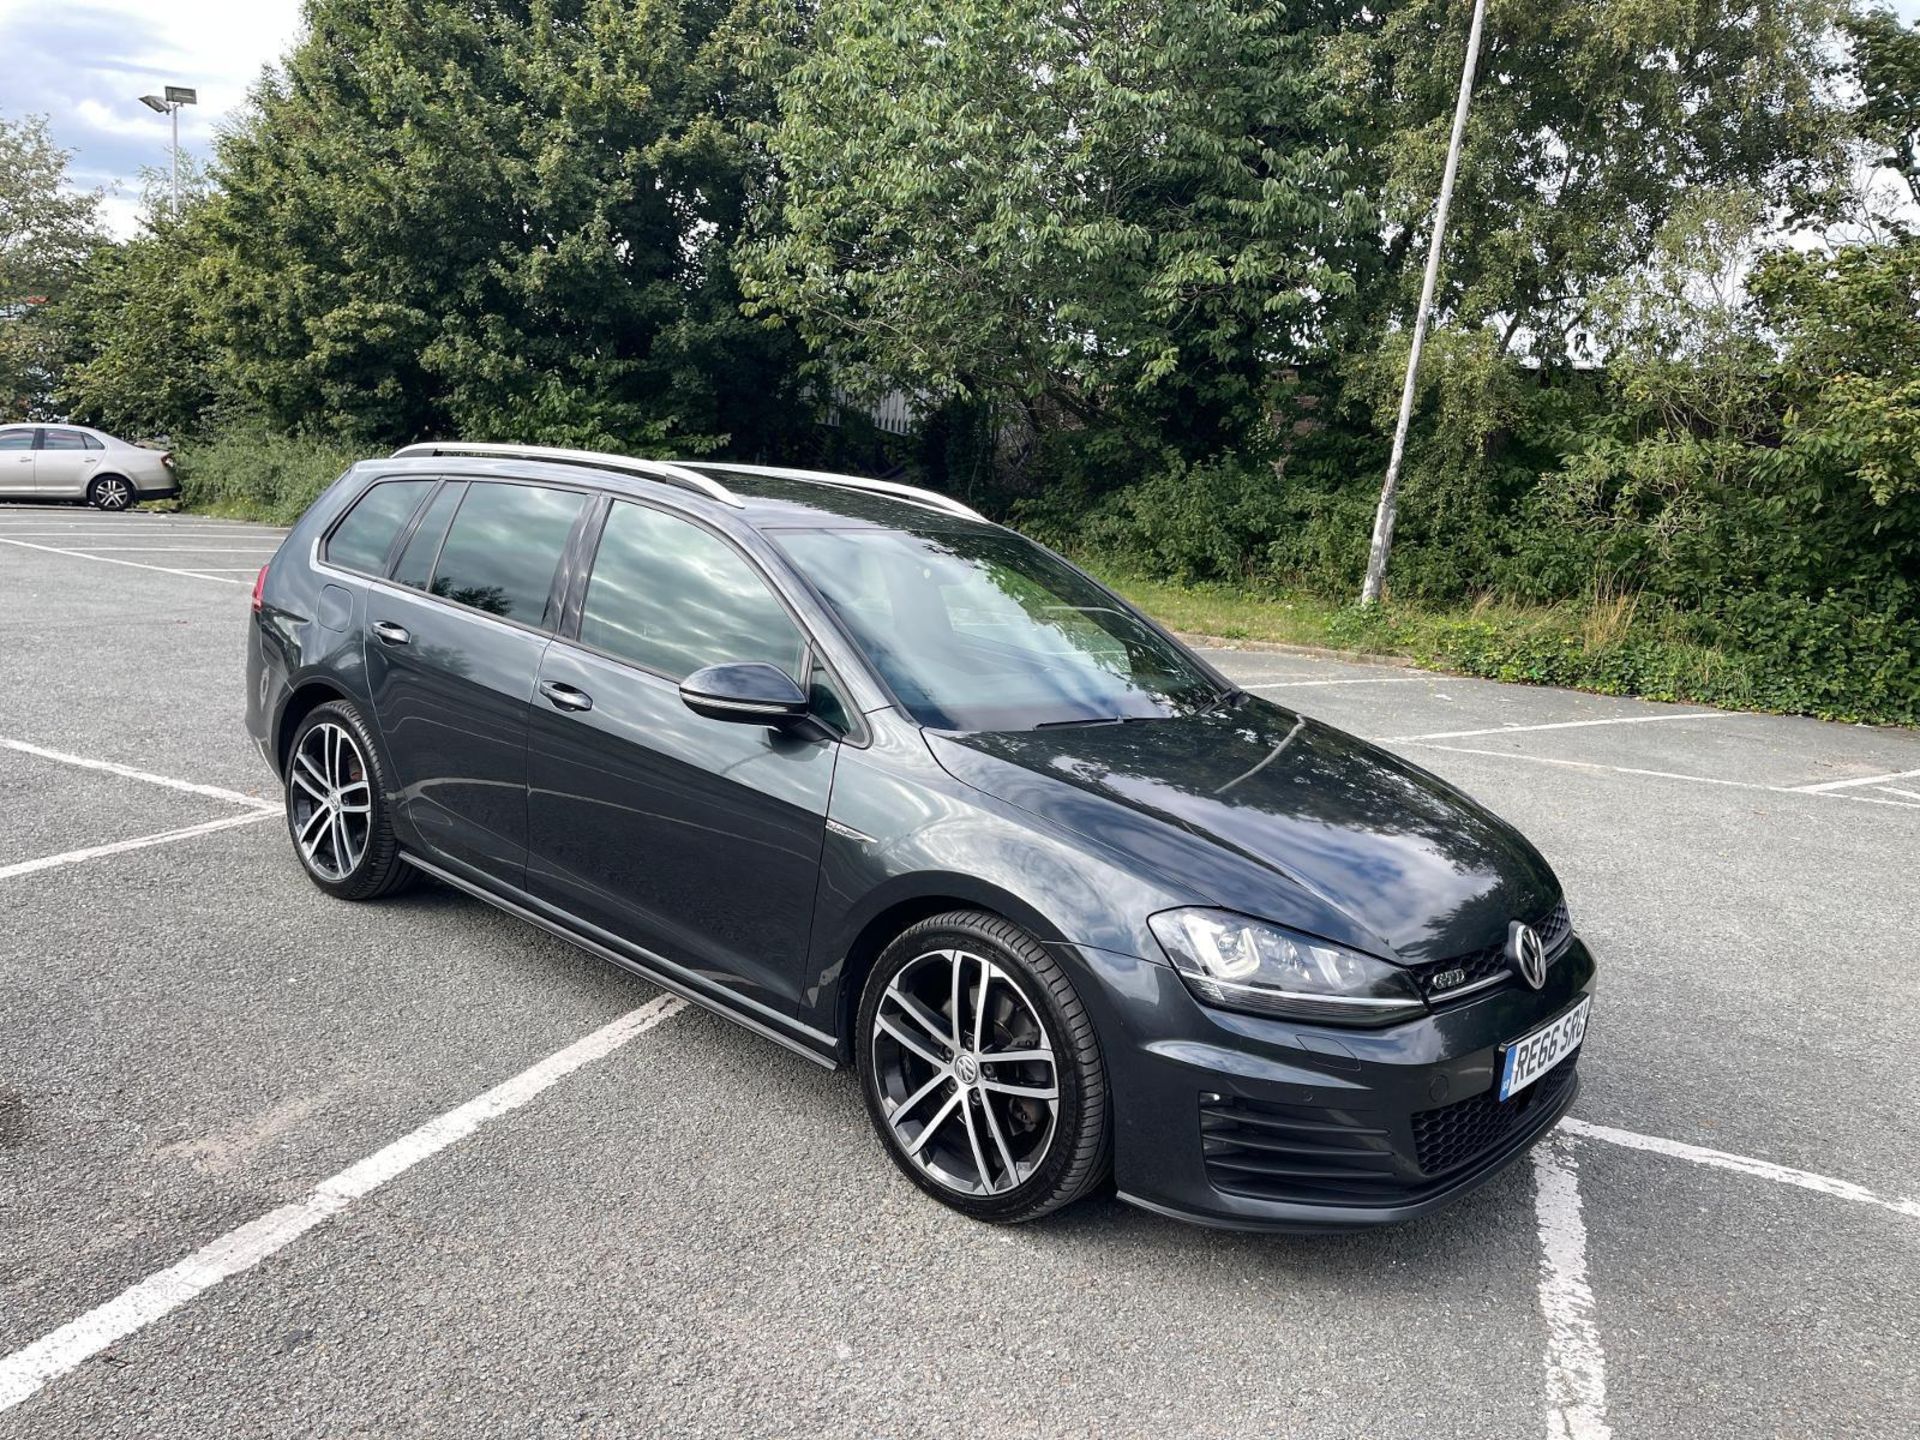 66 PLATE GOLF GTD : USUAL REFINEMENTS AND MORE - 12 MONTH MOT (NO VAT ON HAMMER) - Image 2 of 12